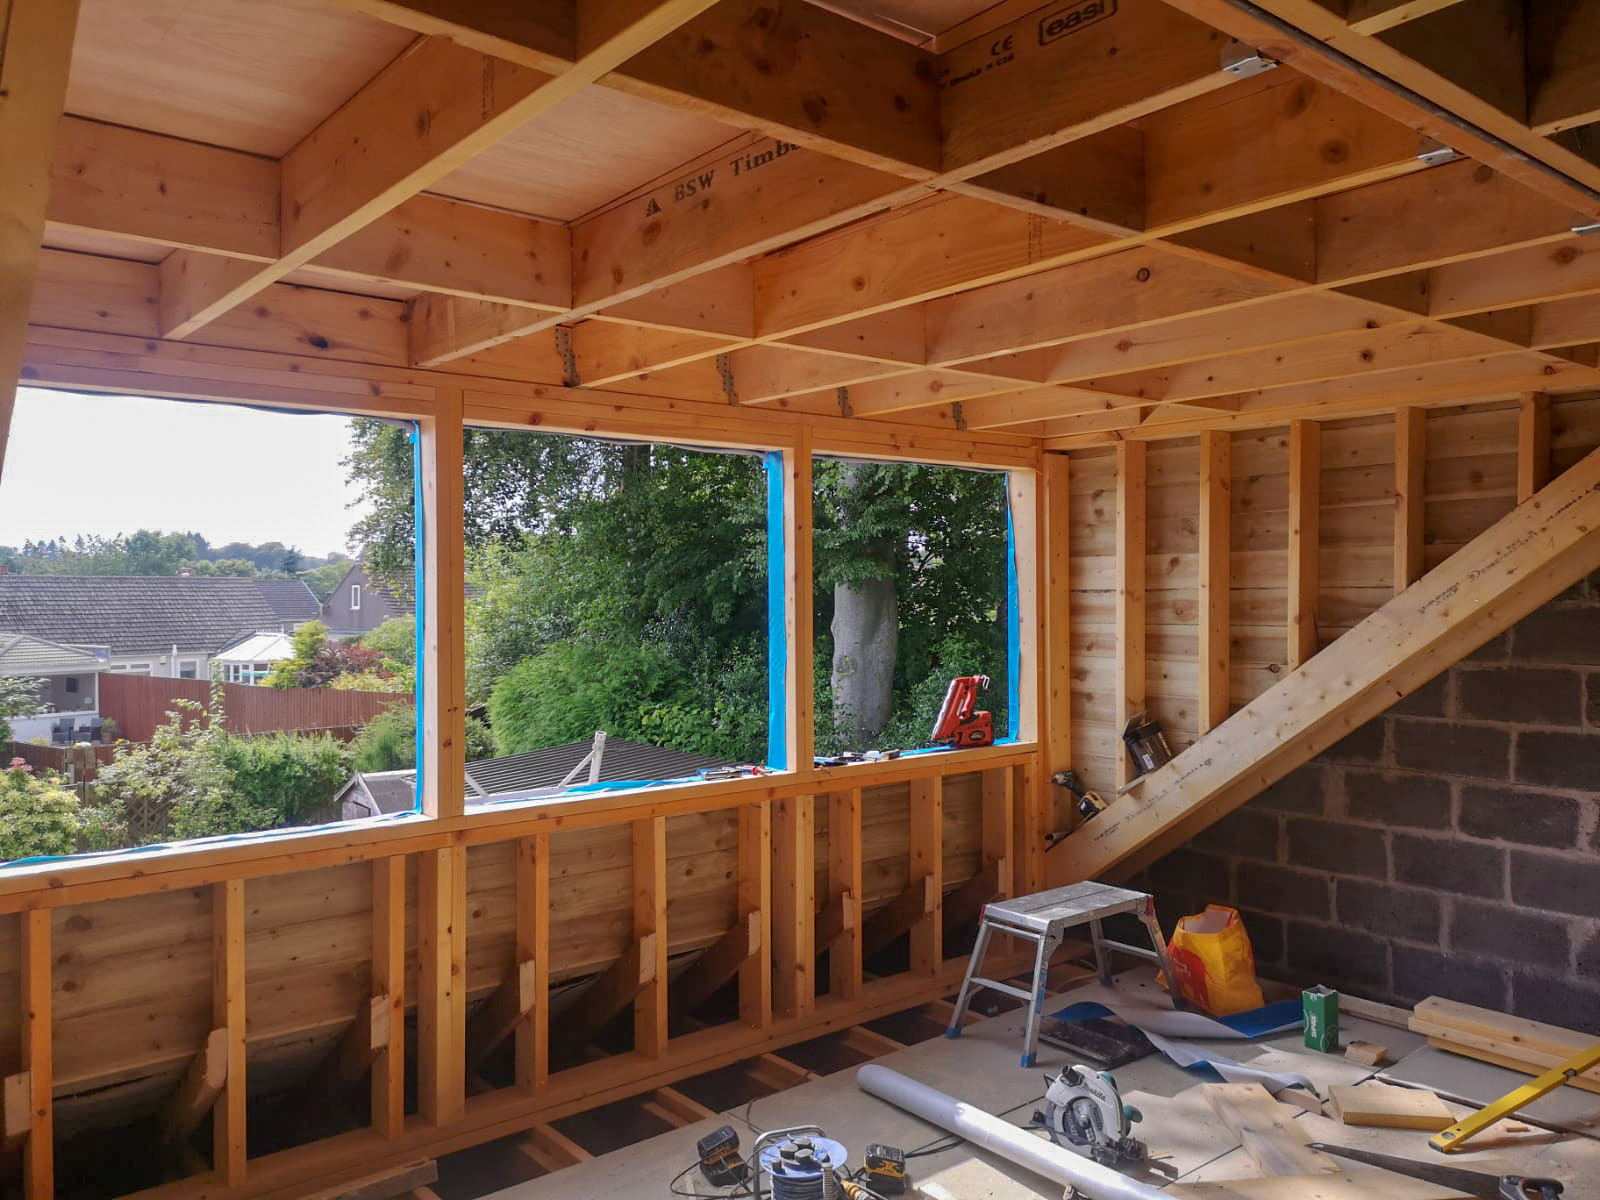 What Are The Different Types Of Loft Conversion?